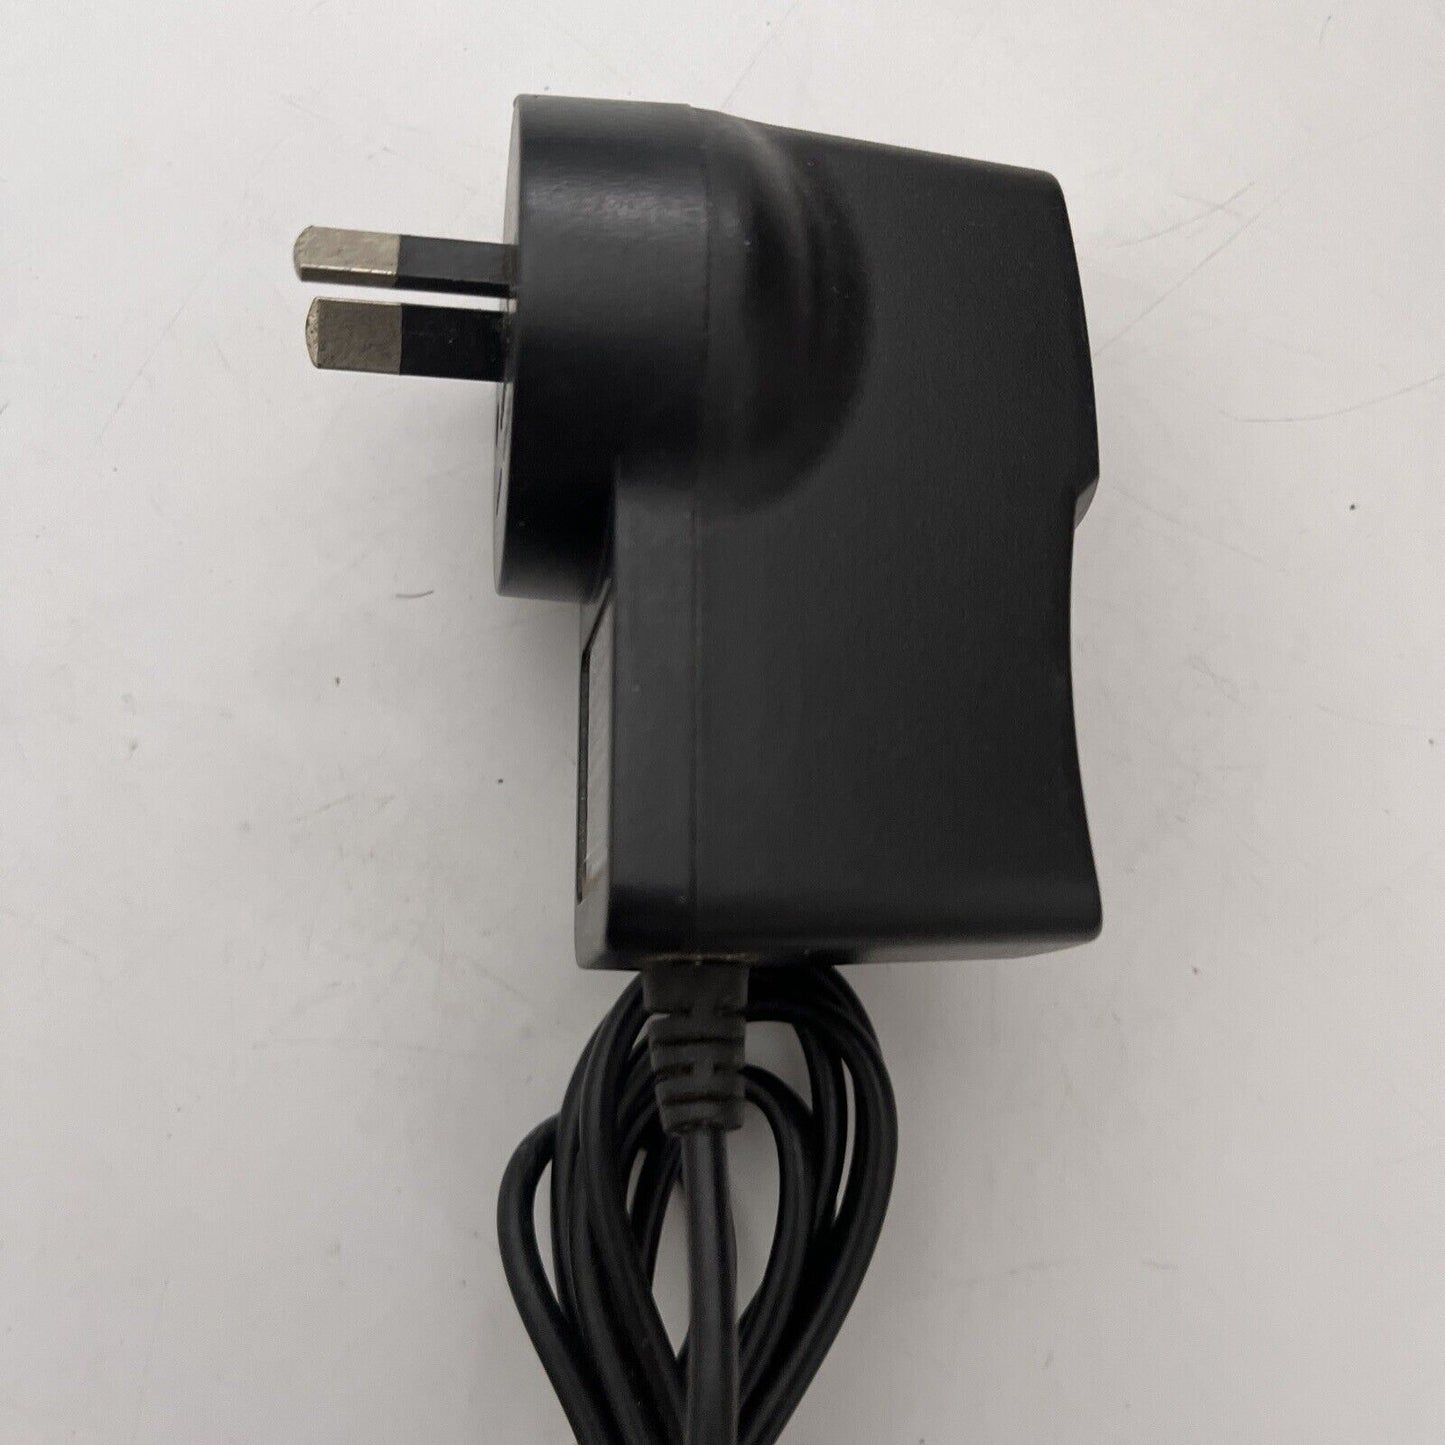 Genuine Pendo Tablet AC Adapter Charger 5V 200mA EE5020-388